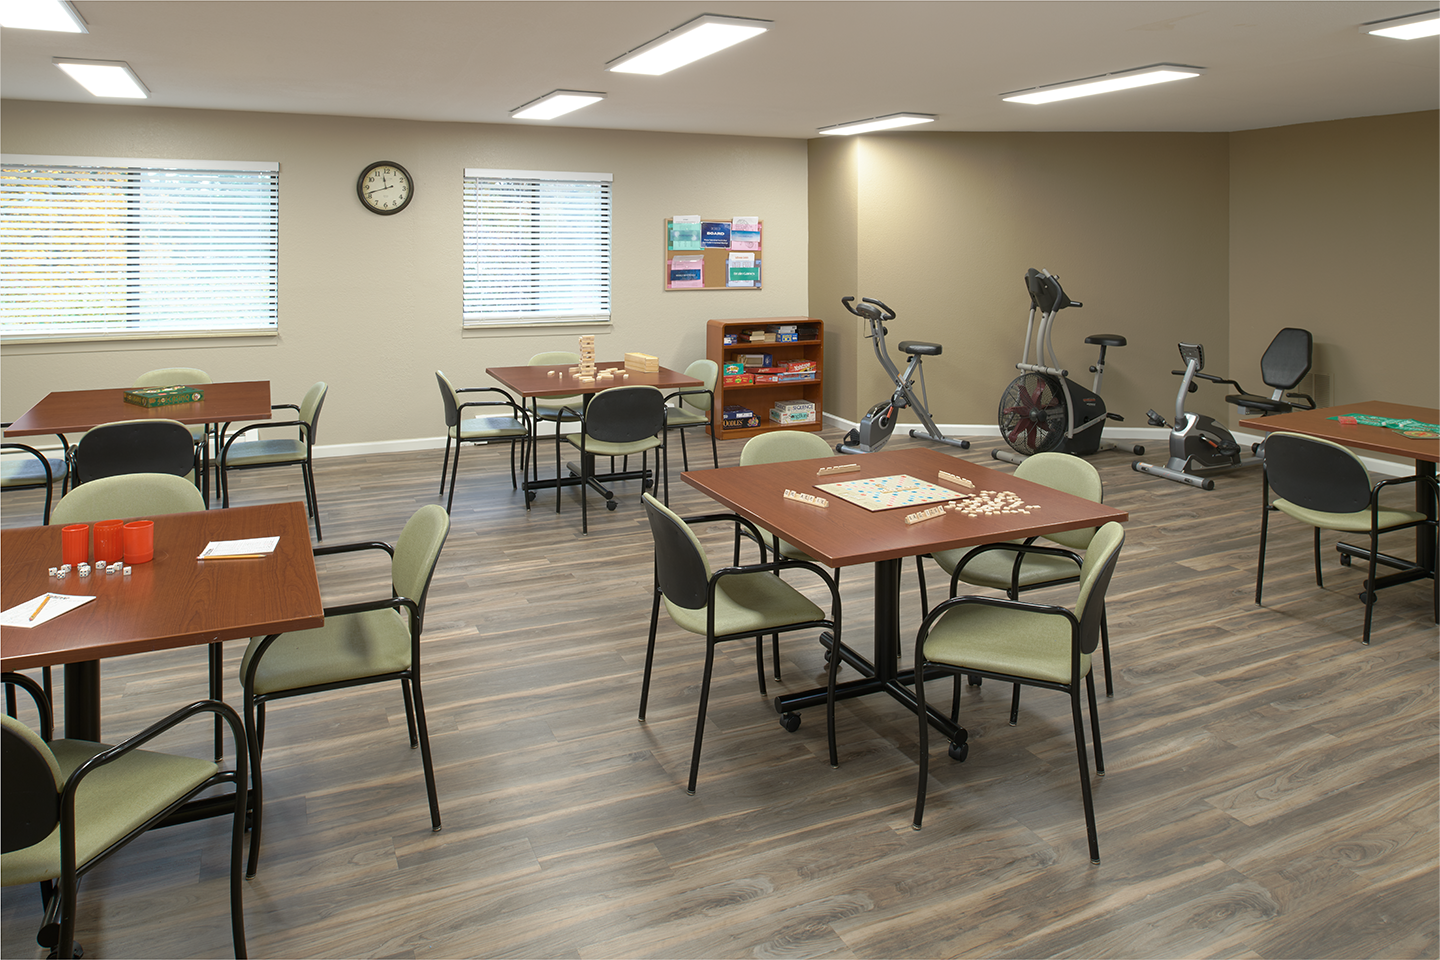 Exercise room and activities area at American House Grand Blanc, a retirement community.